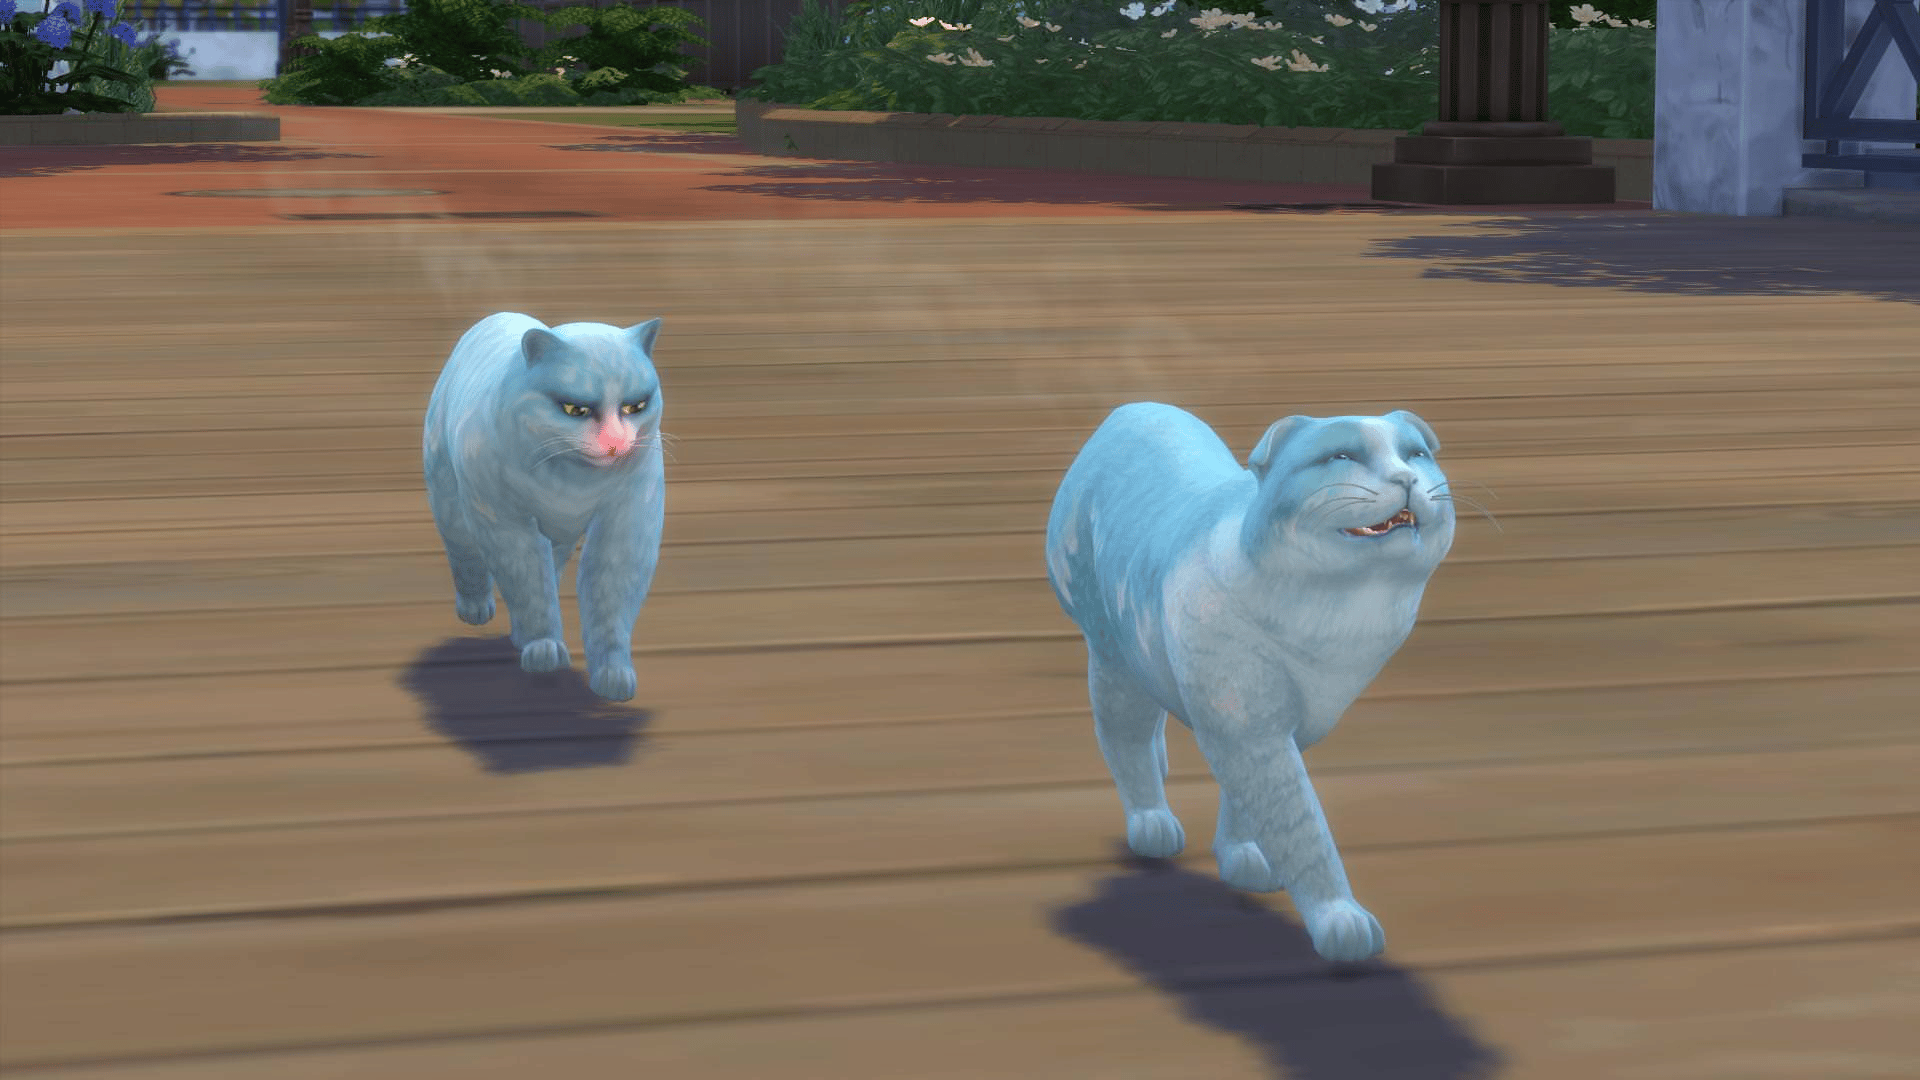 Some stray cats in The Sims 4